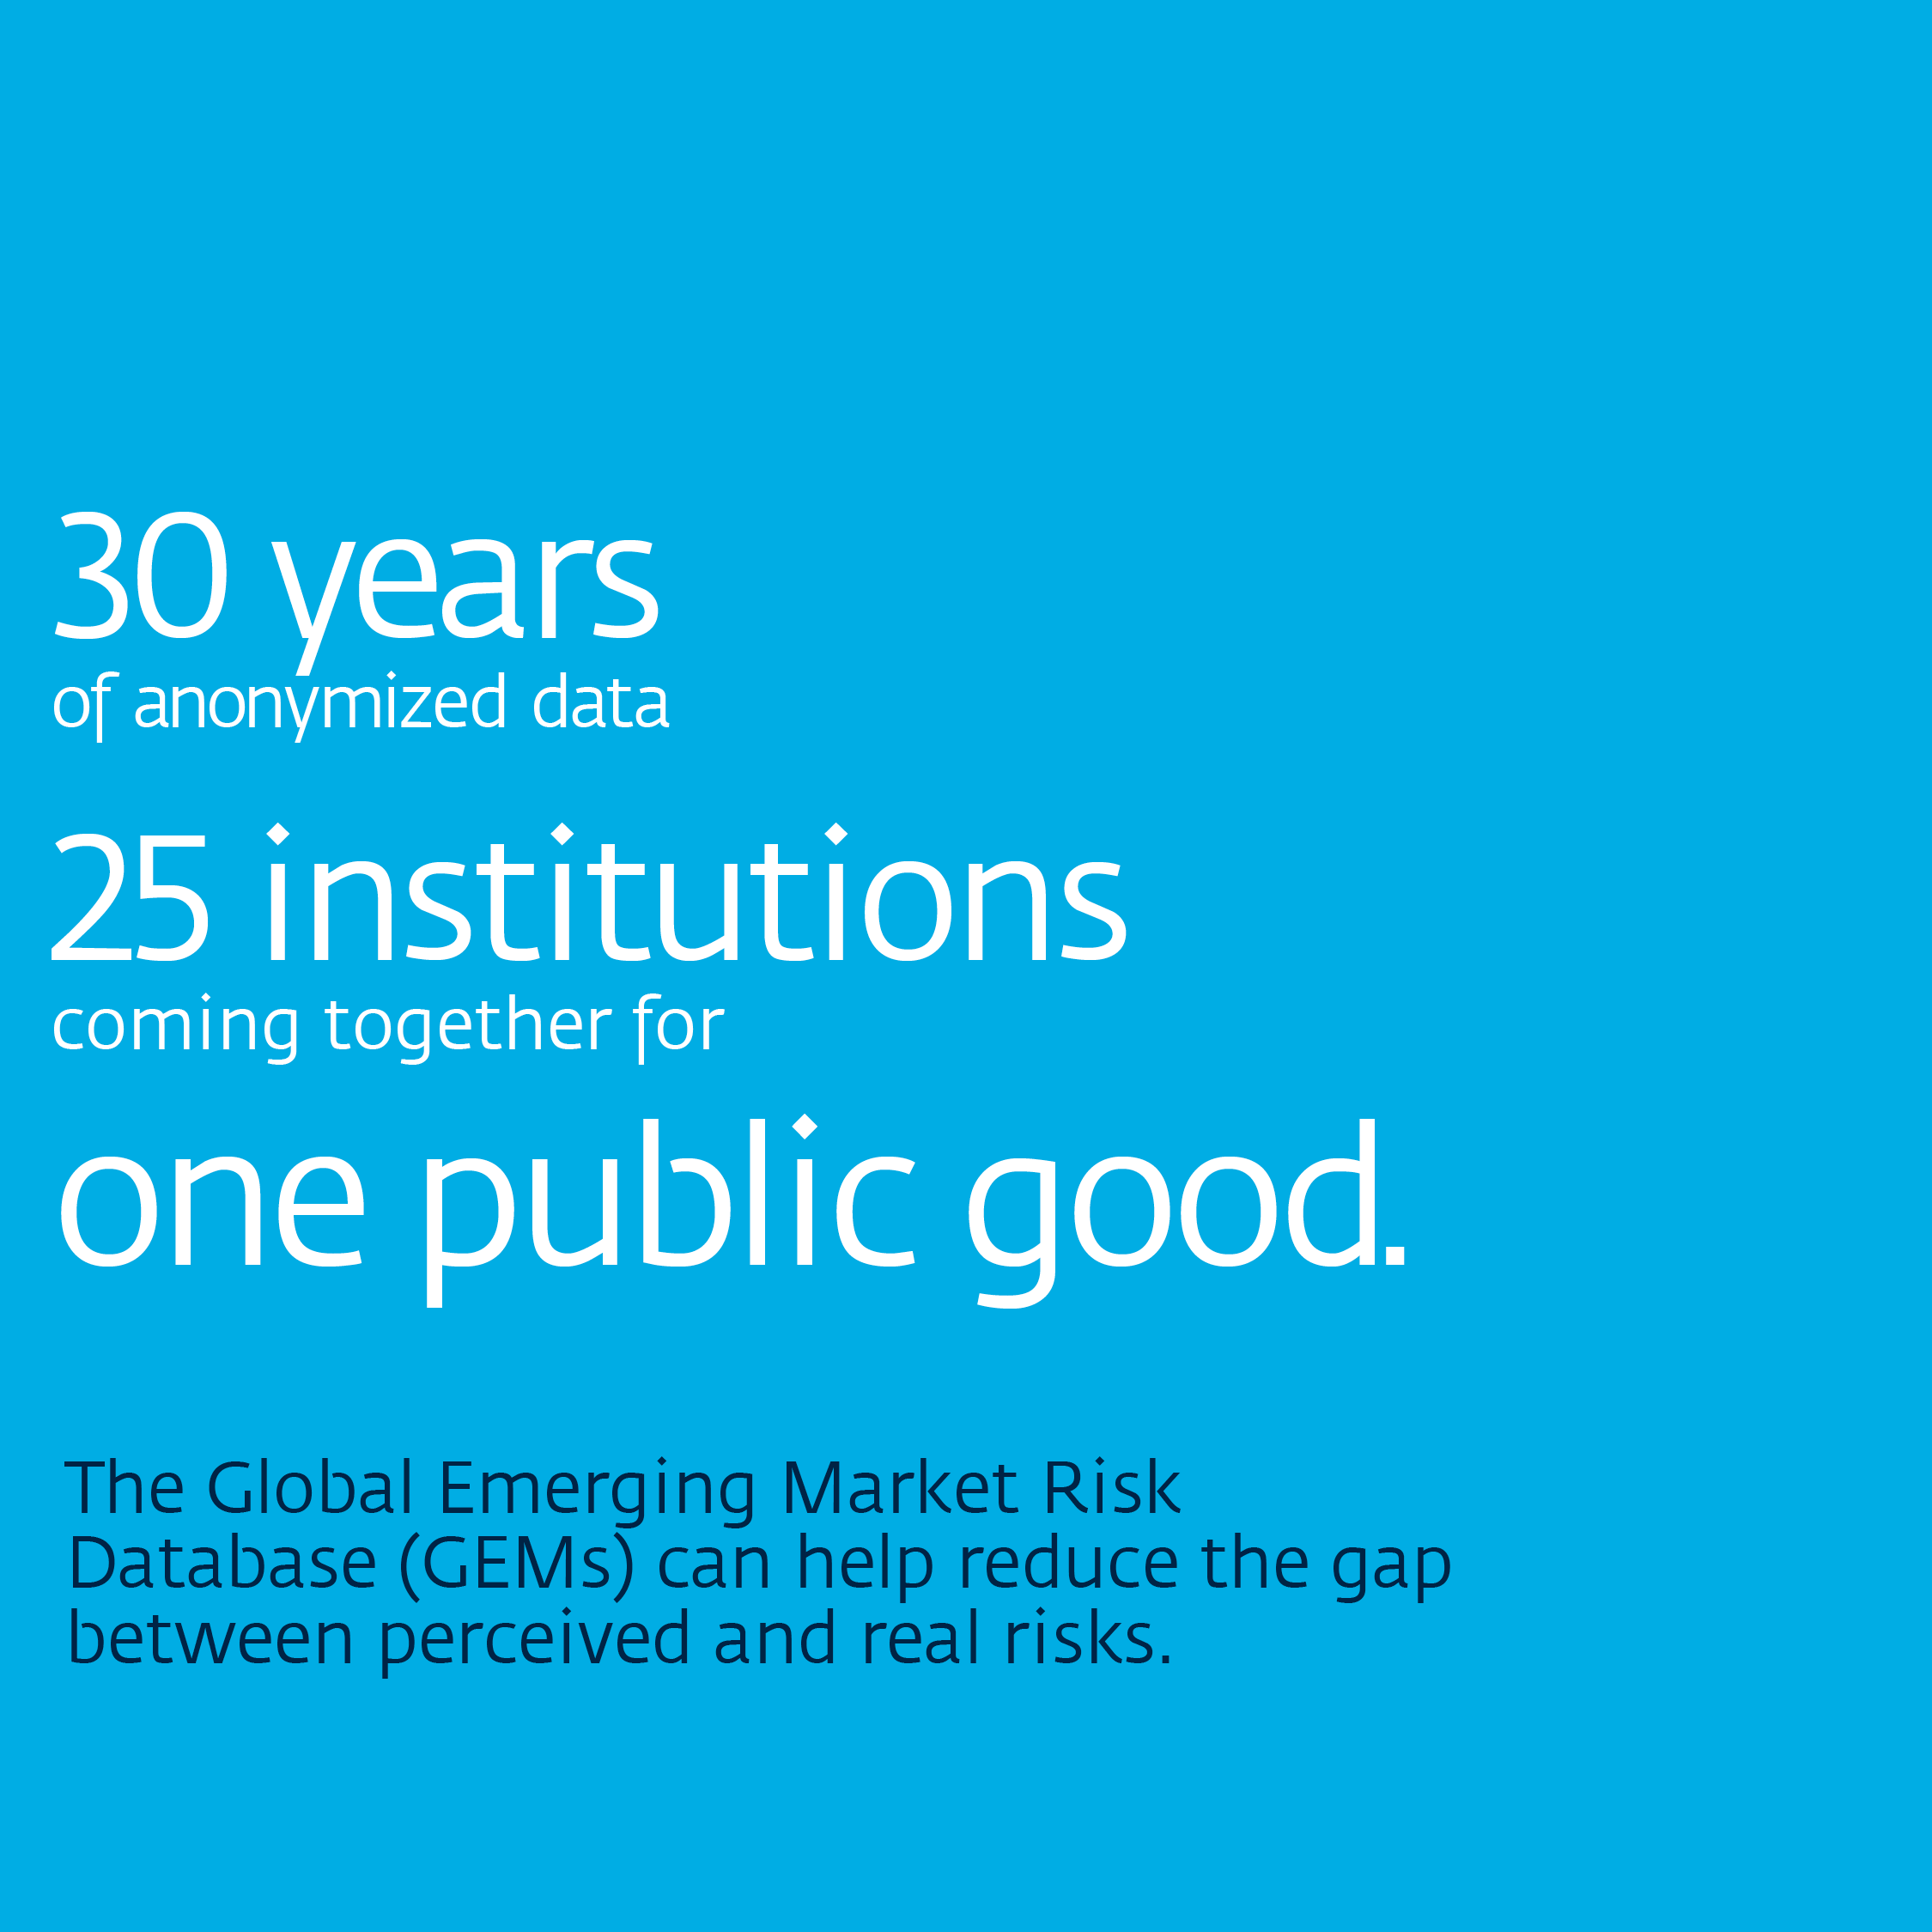 GEMs database provides 30 years of anonymized data from 25 institutions for public good.